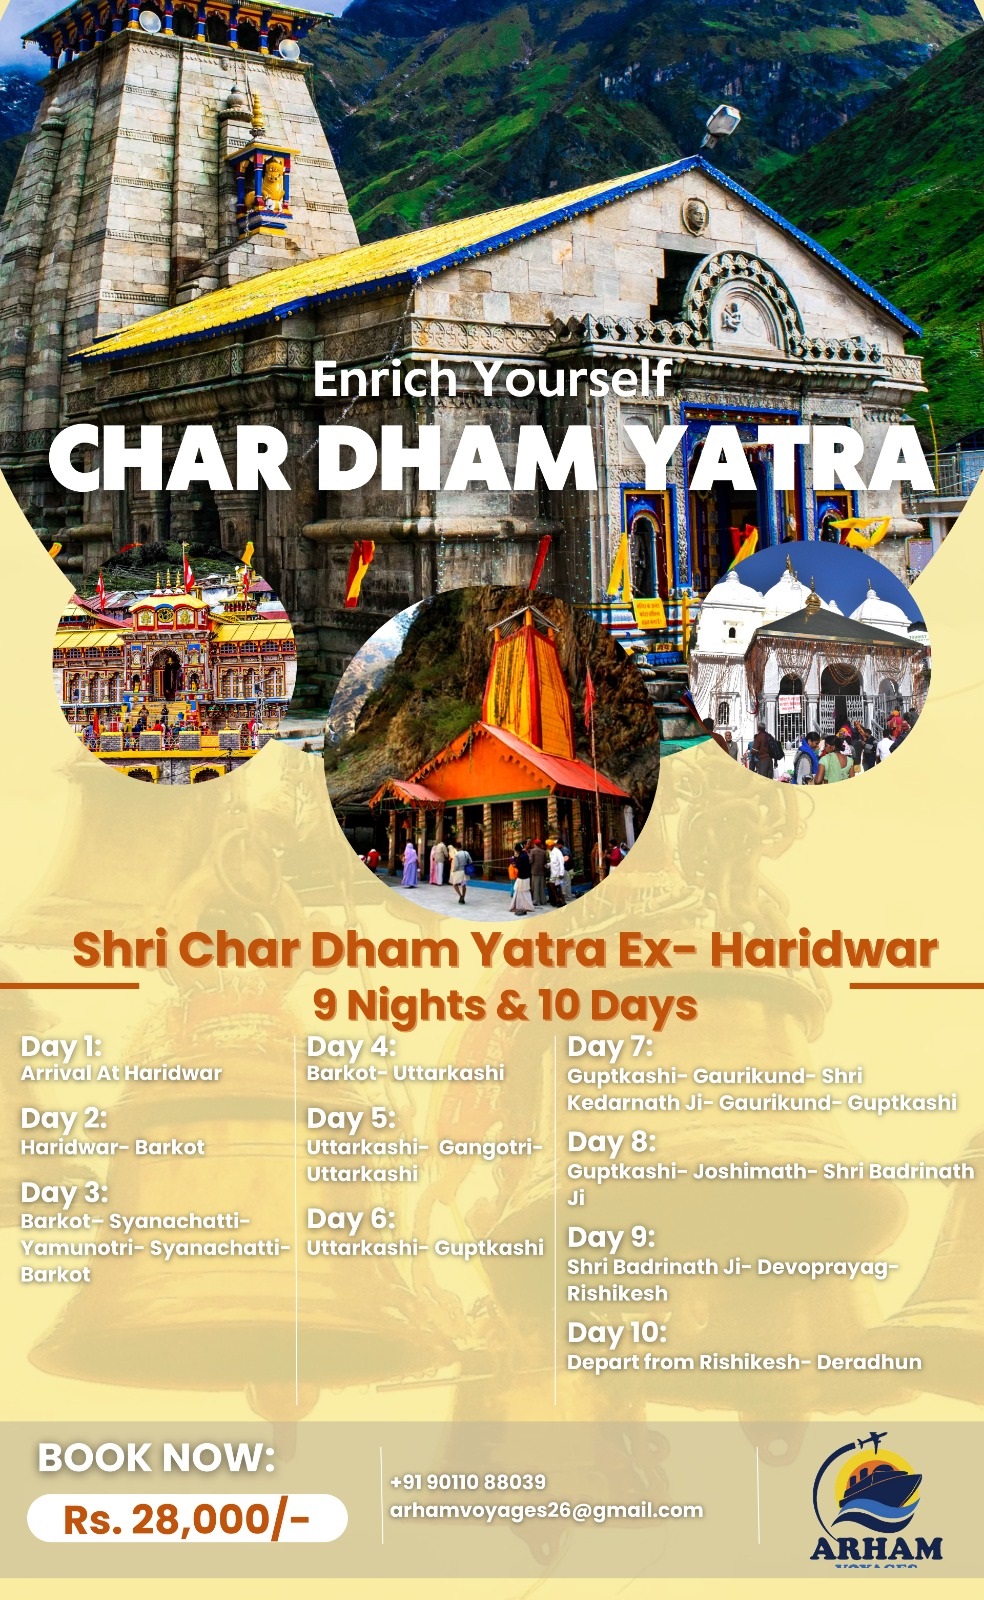 Char Dham Yatra tour package